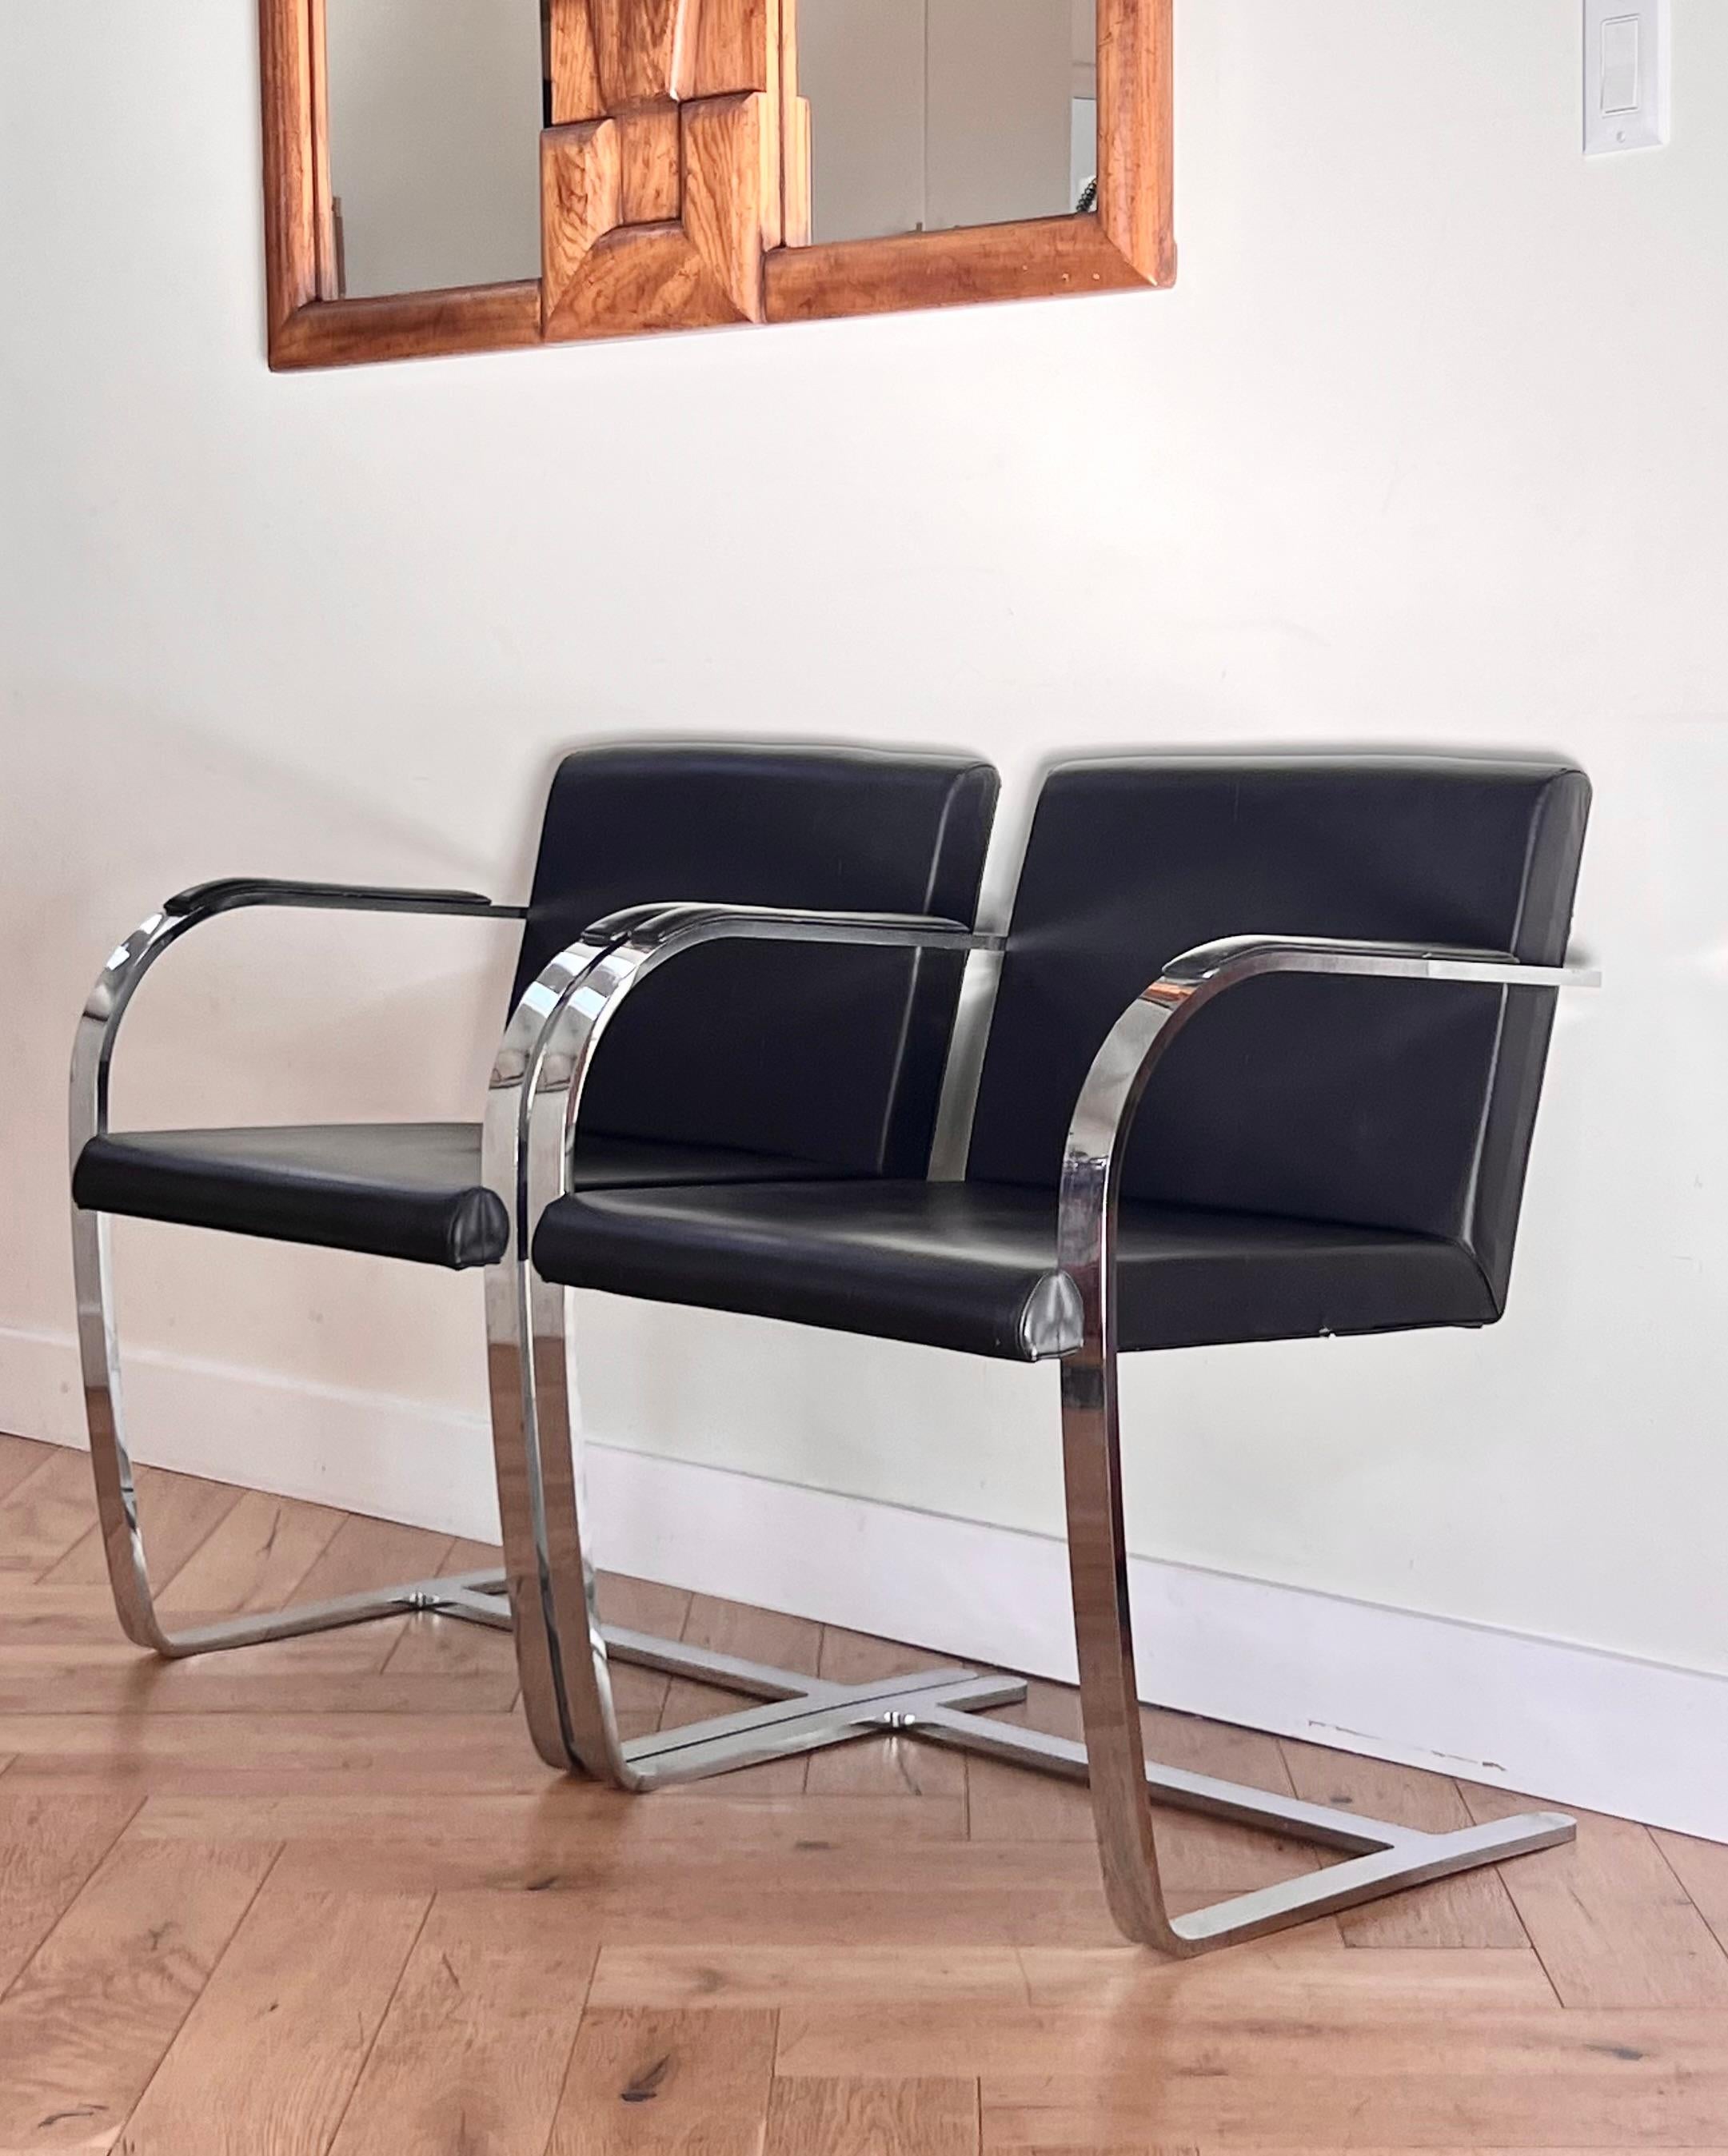 Pair of Mies van der Rohe Brno chairs by Palazzetti, 1970s For Sale 13